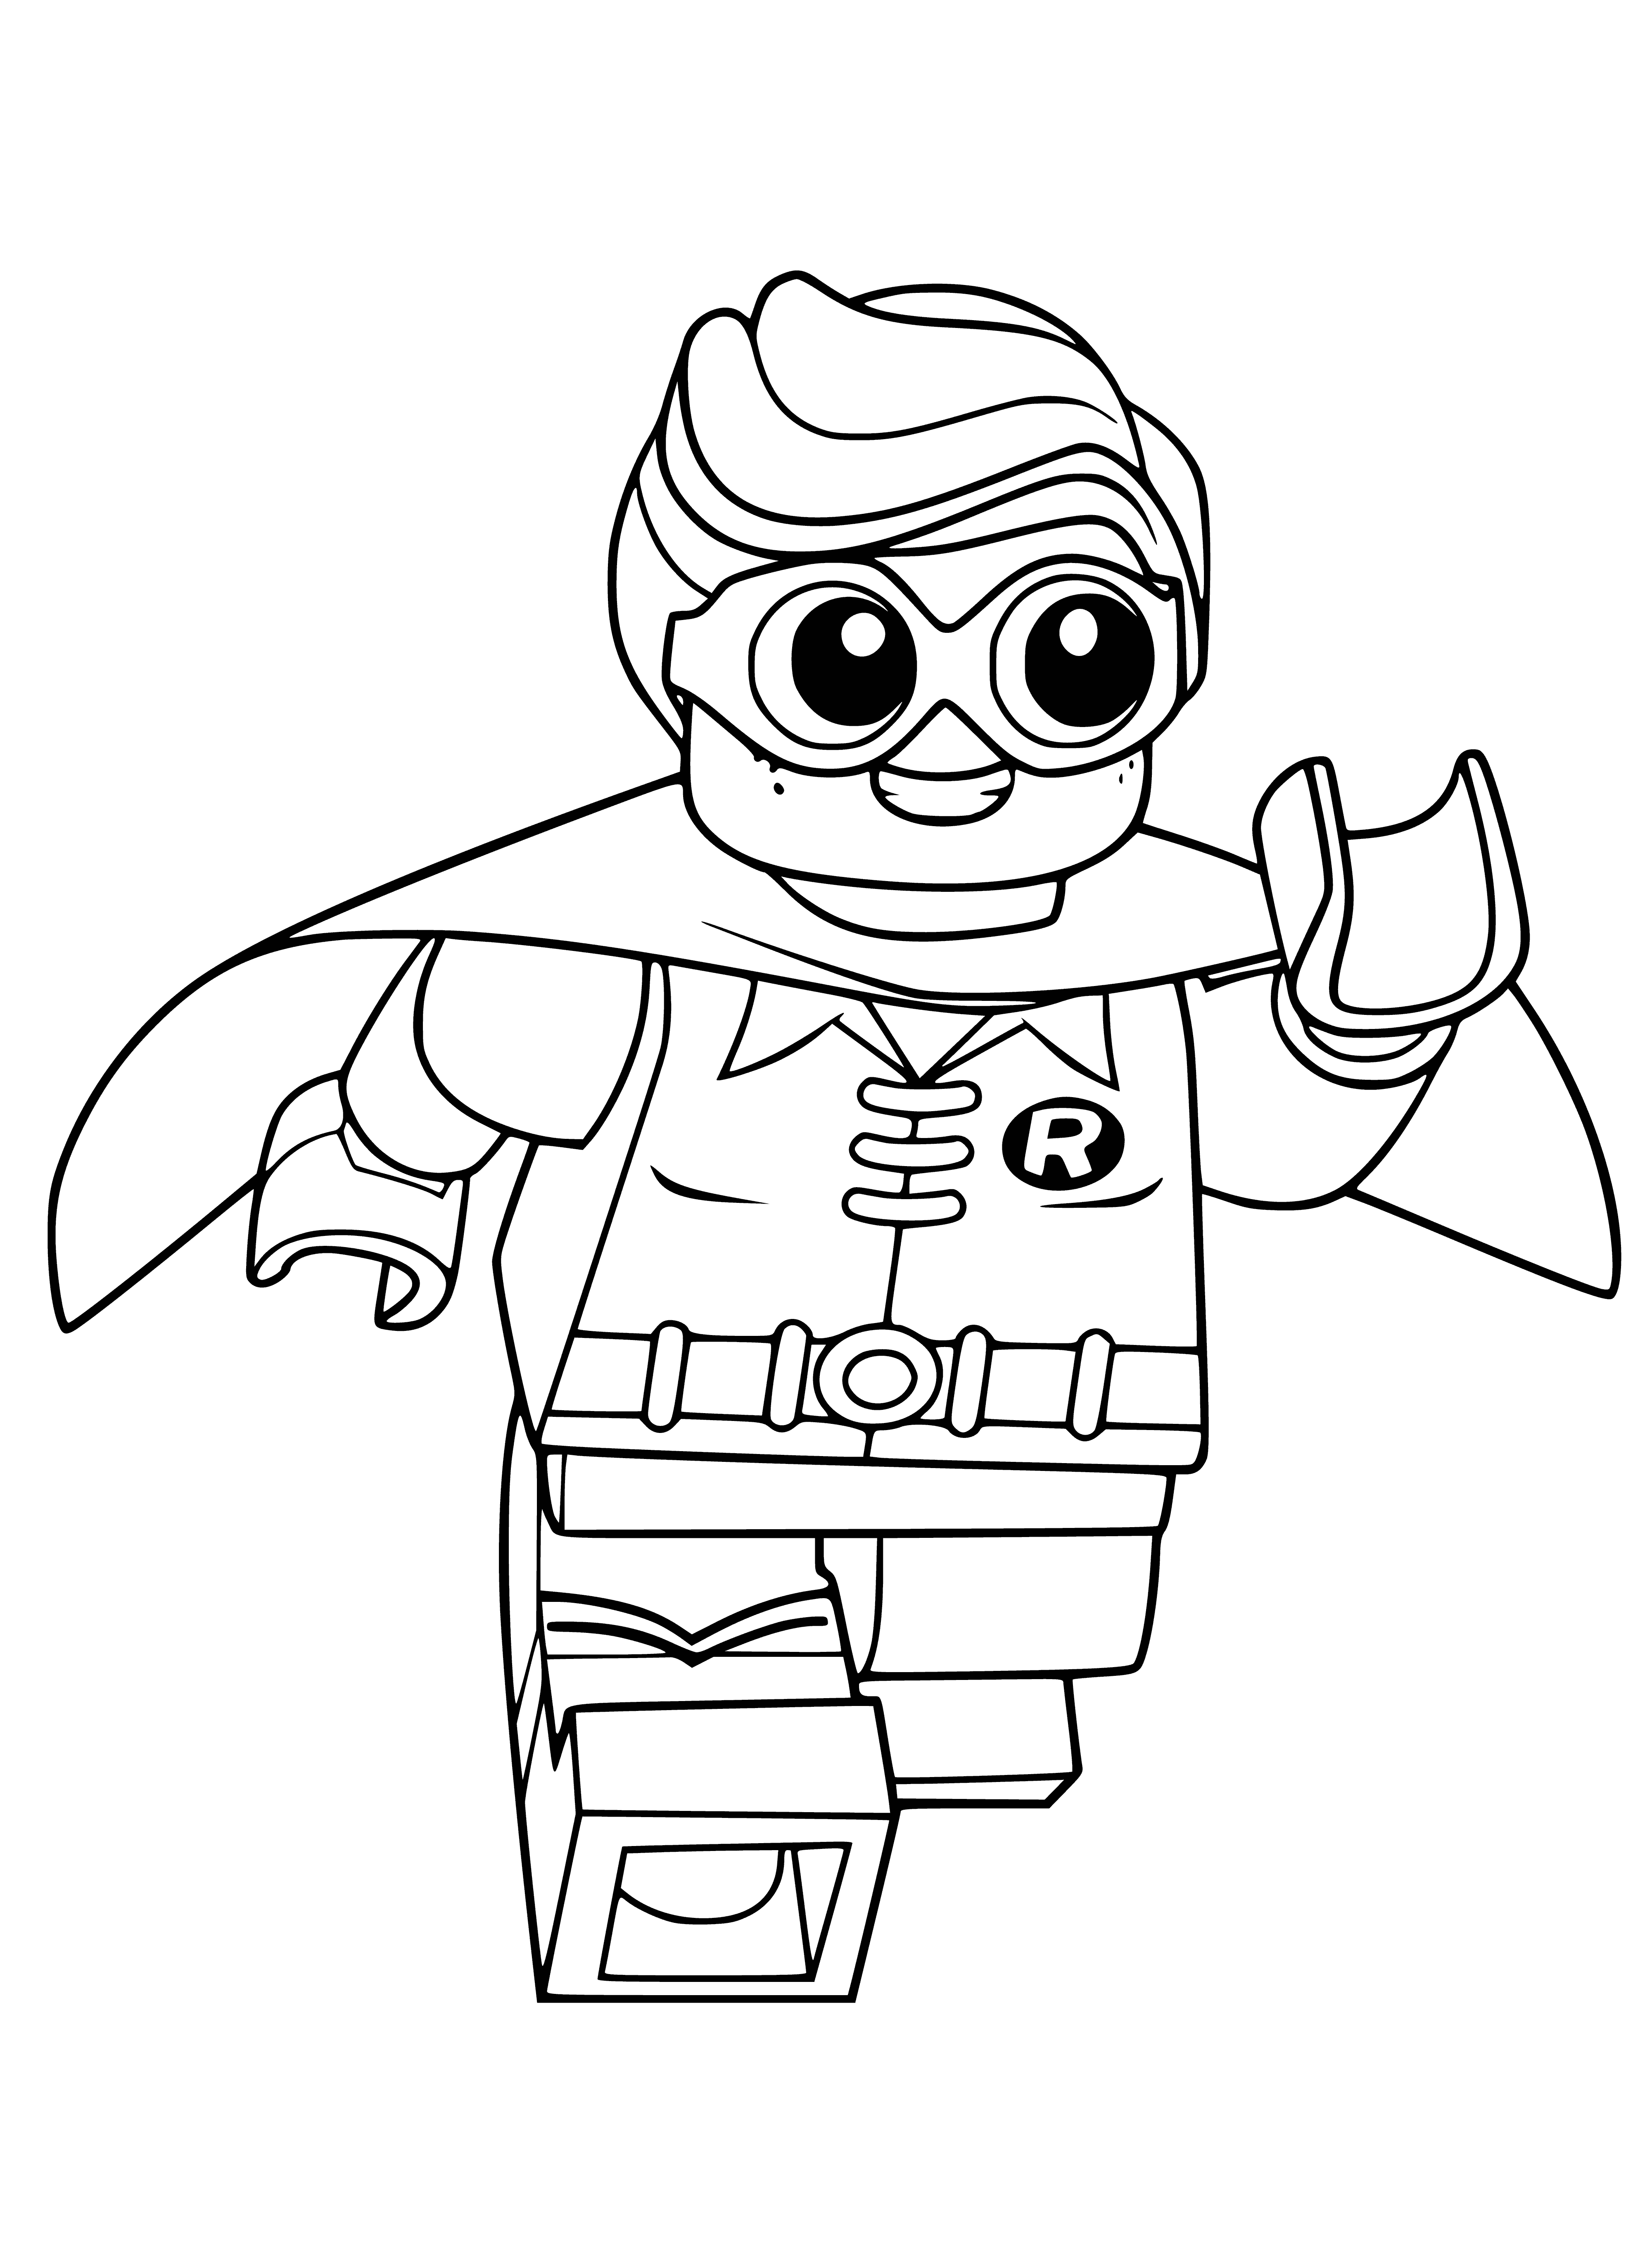 Lego Robin coloring page